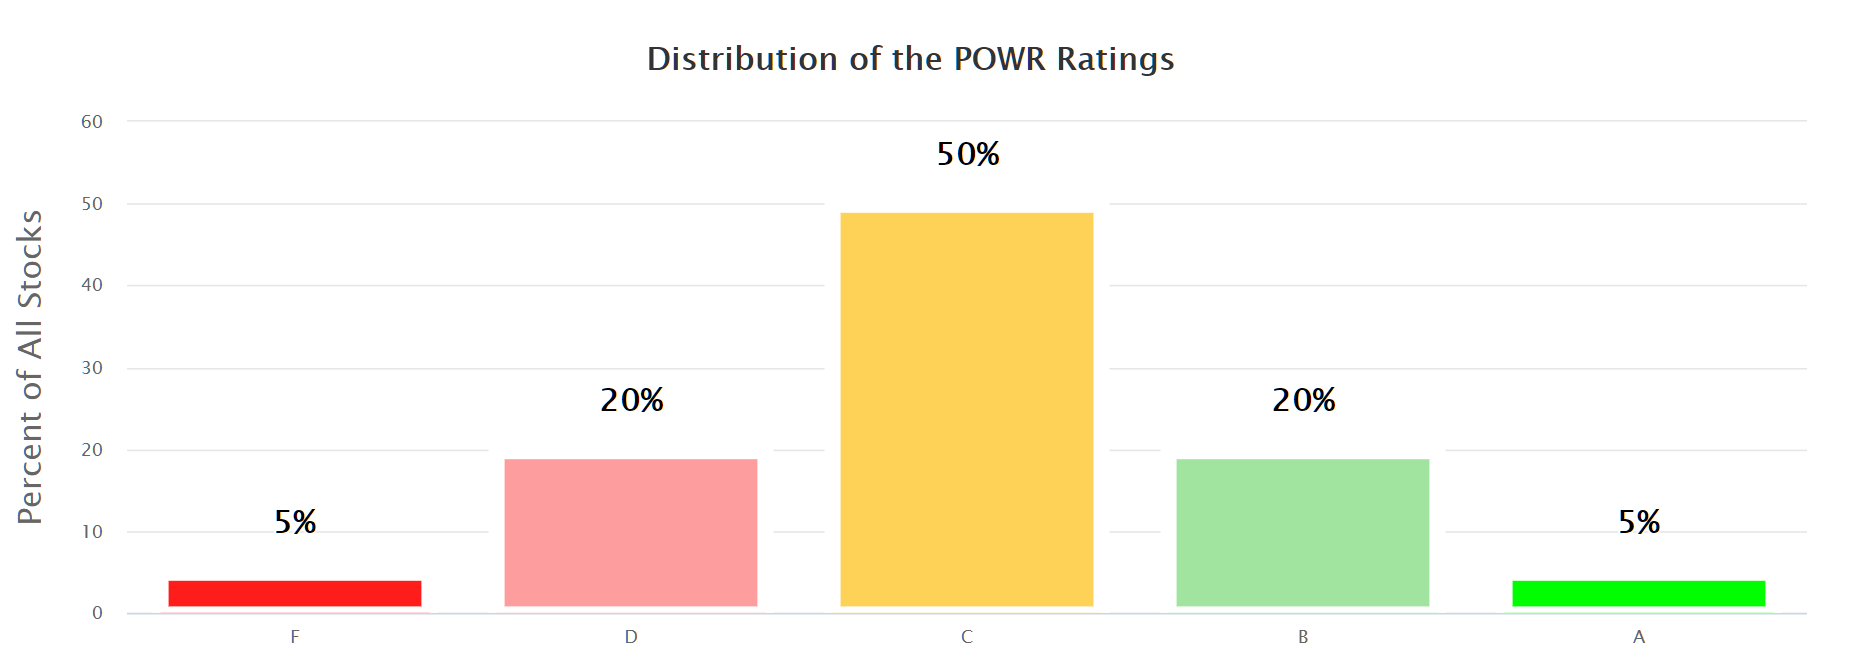 Bar Chart of the distribution percentage of the POWR Ratings, where 'C' rated is the most common at 50%, and 'A' rated is 5%;